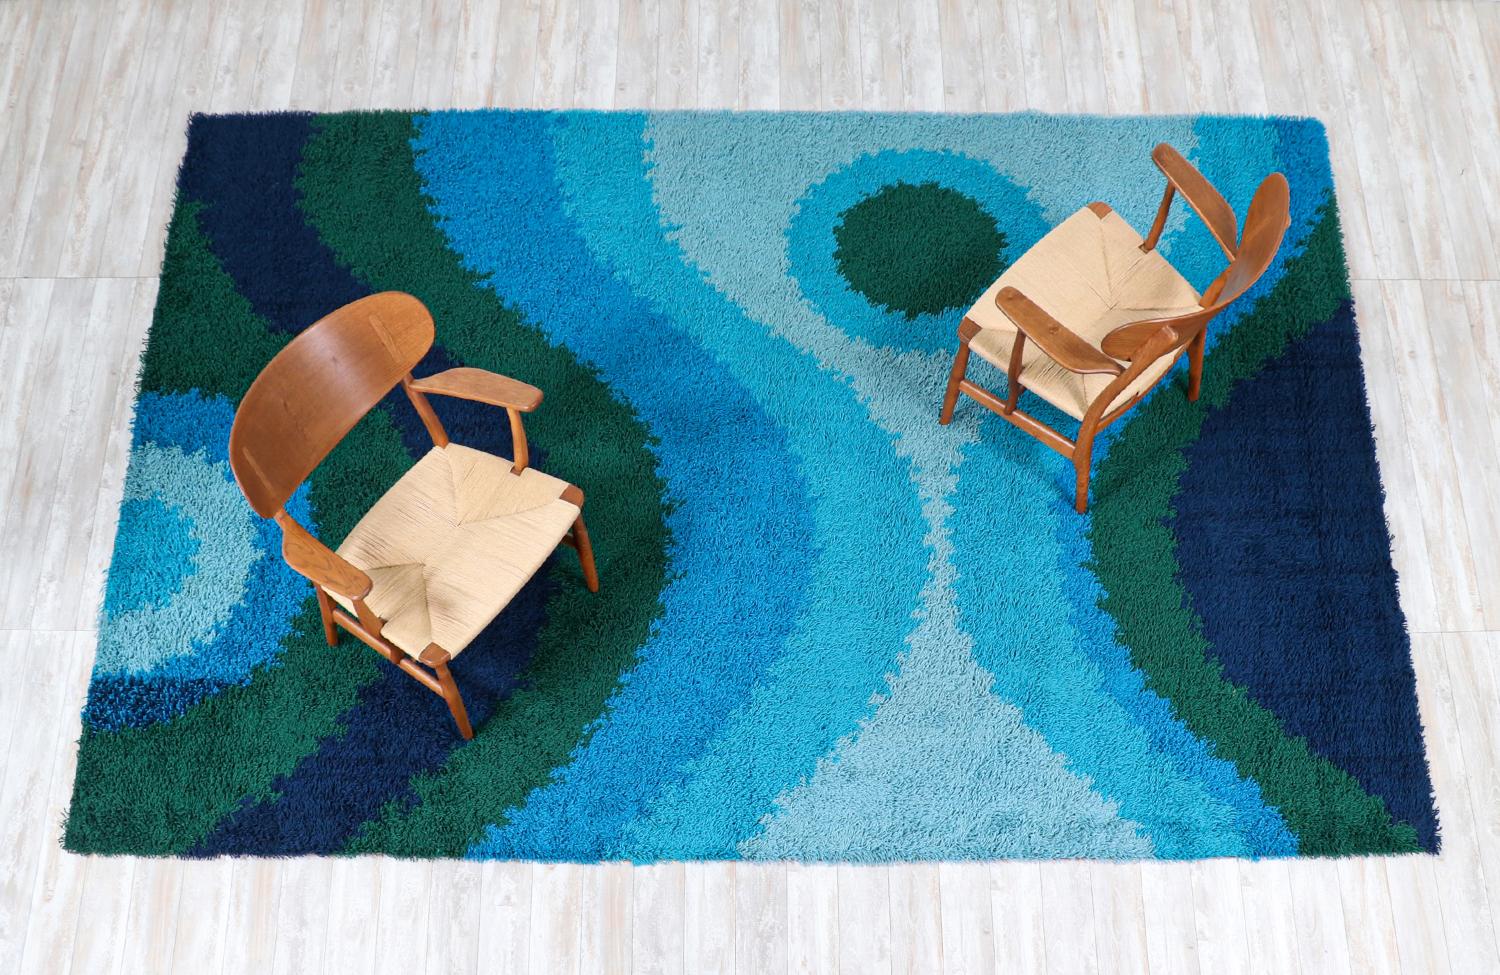 Mid-Century Modern Large Danish Modern Hand-Knotted Blue/Green Wool Rug by Rya